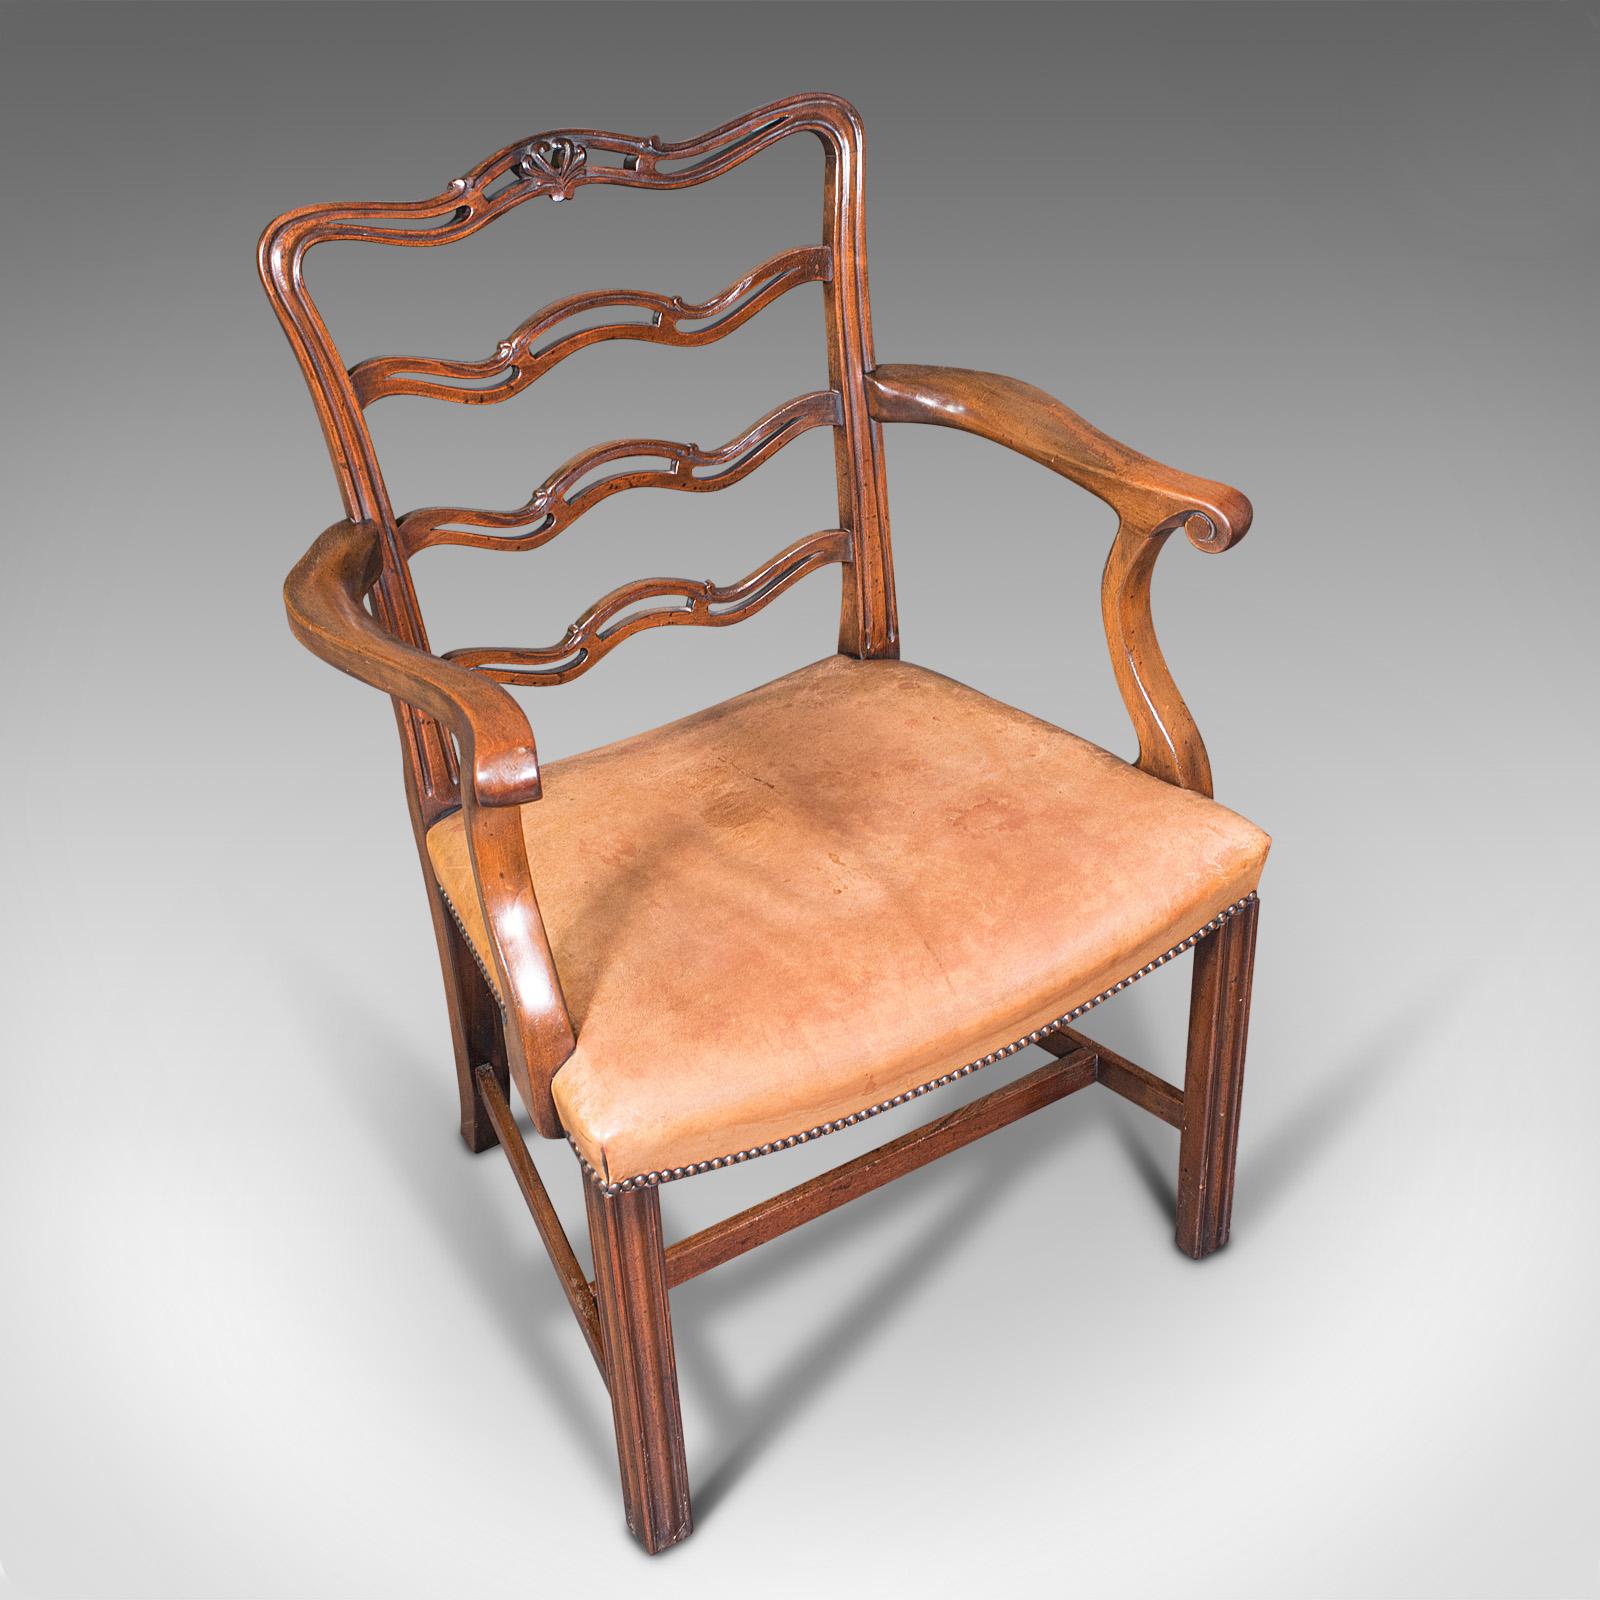 Wood Vintage Ladder Back Study Chair, Irish, Leather, Elbow Seat, Carver, Art Deco For Sale